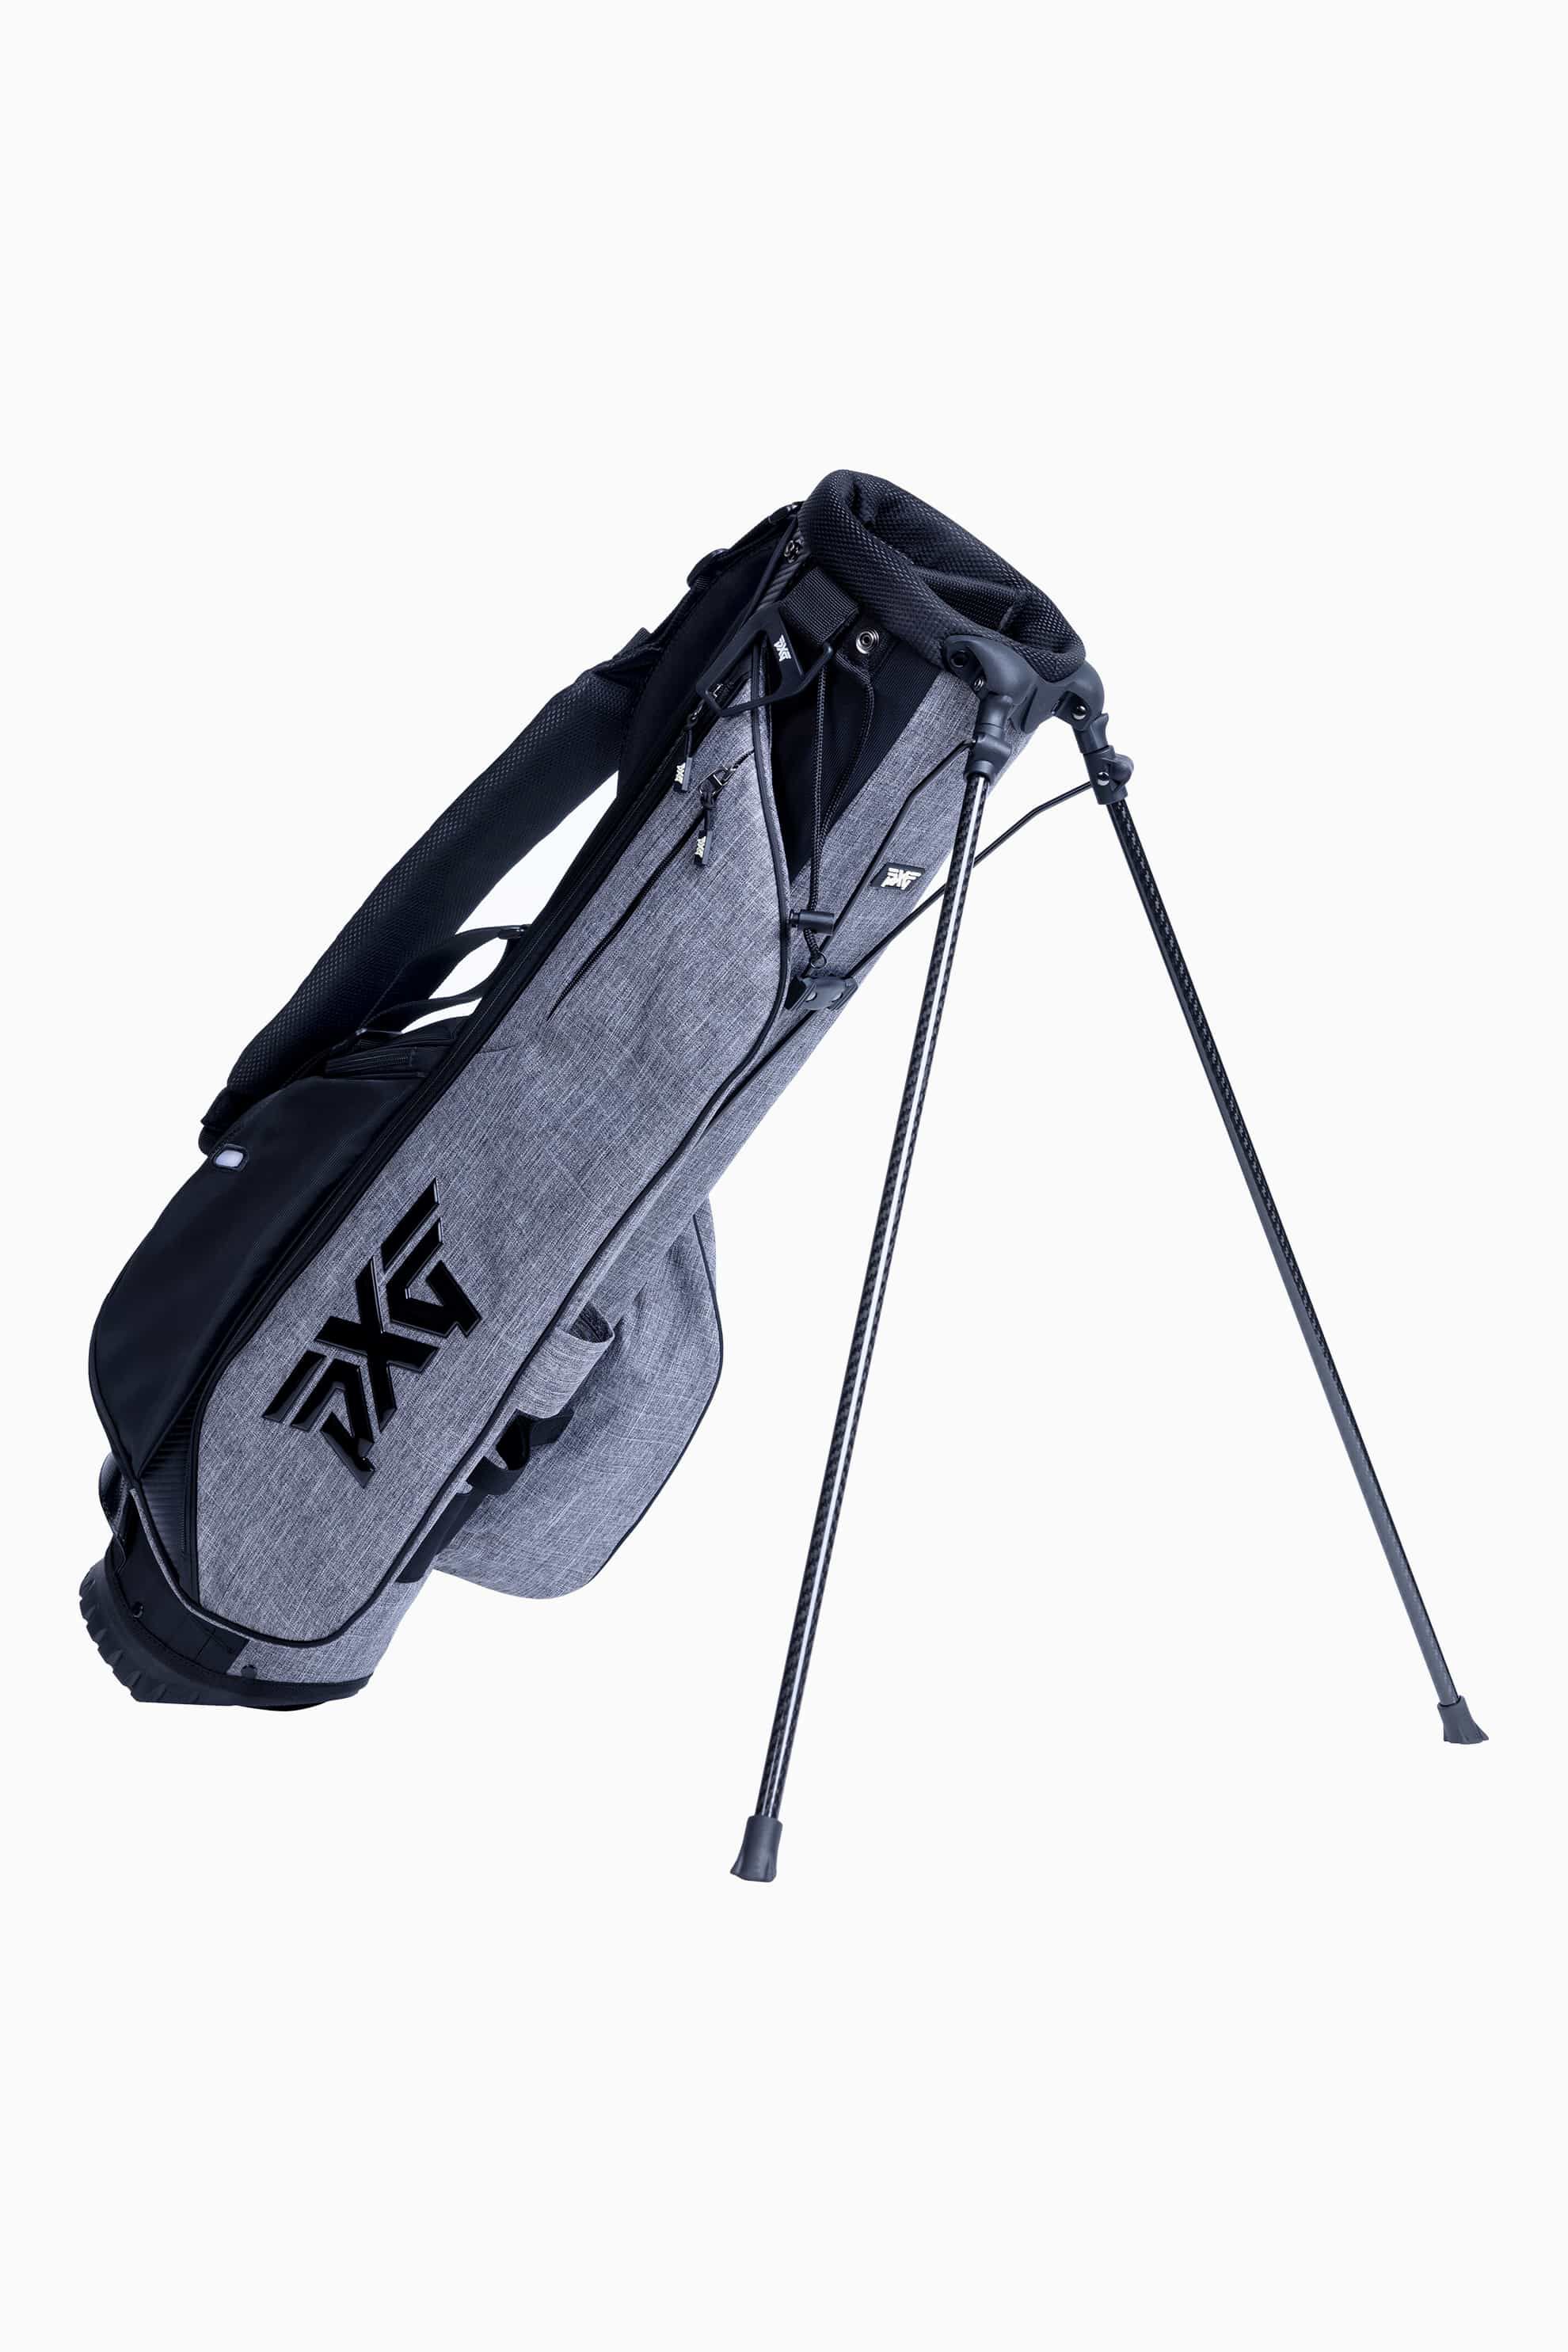 Buy 2022 Sunday Stand Bag | PXG Canada